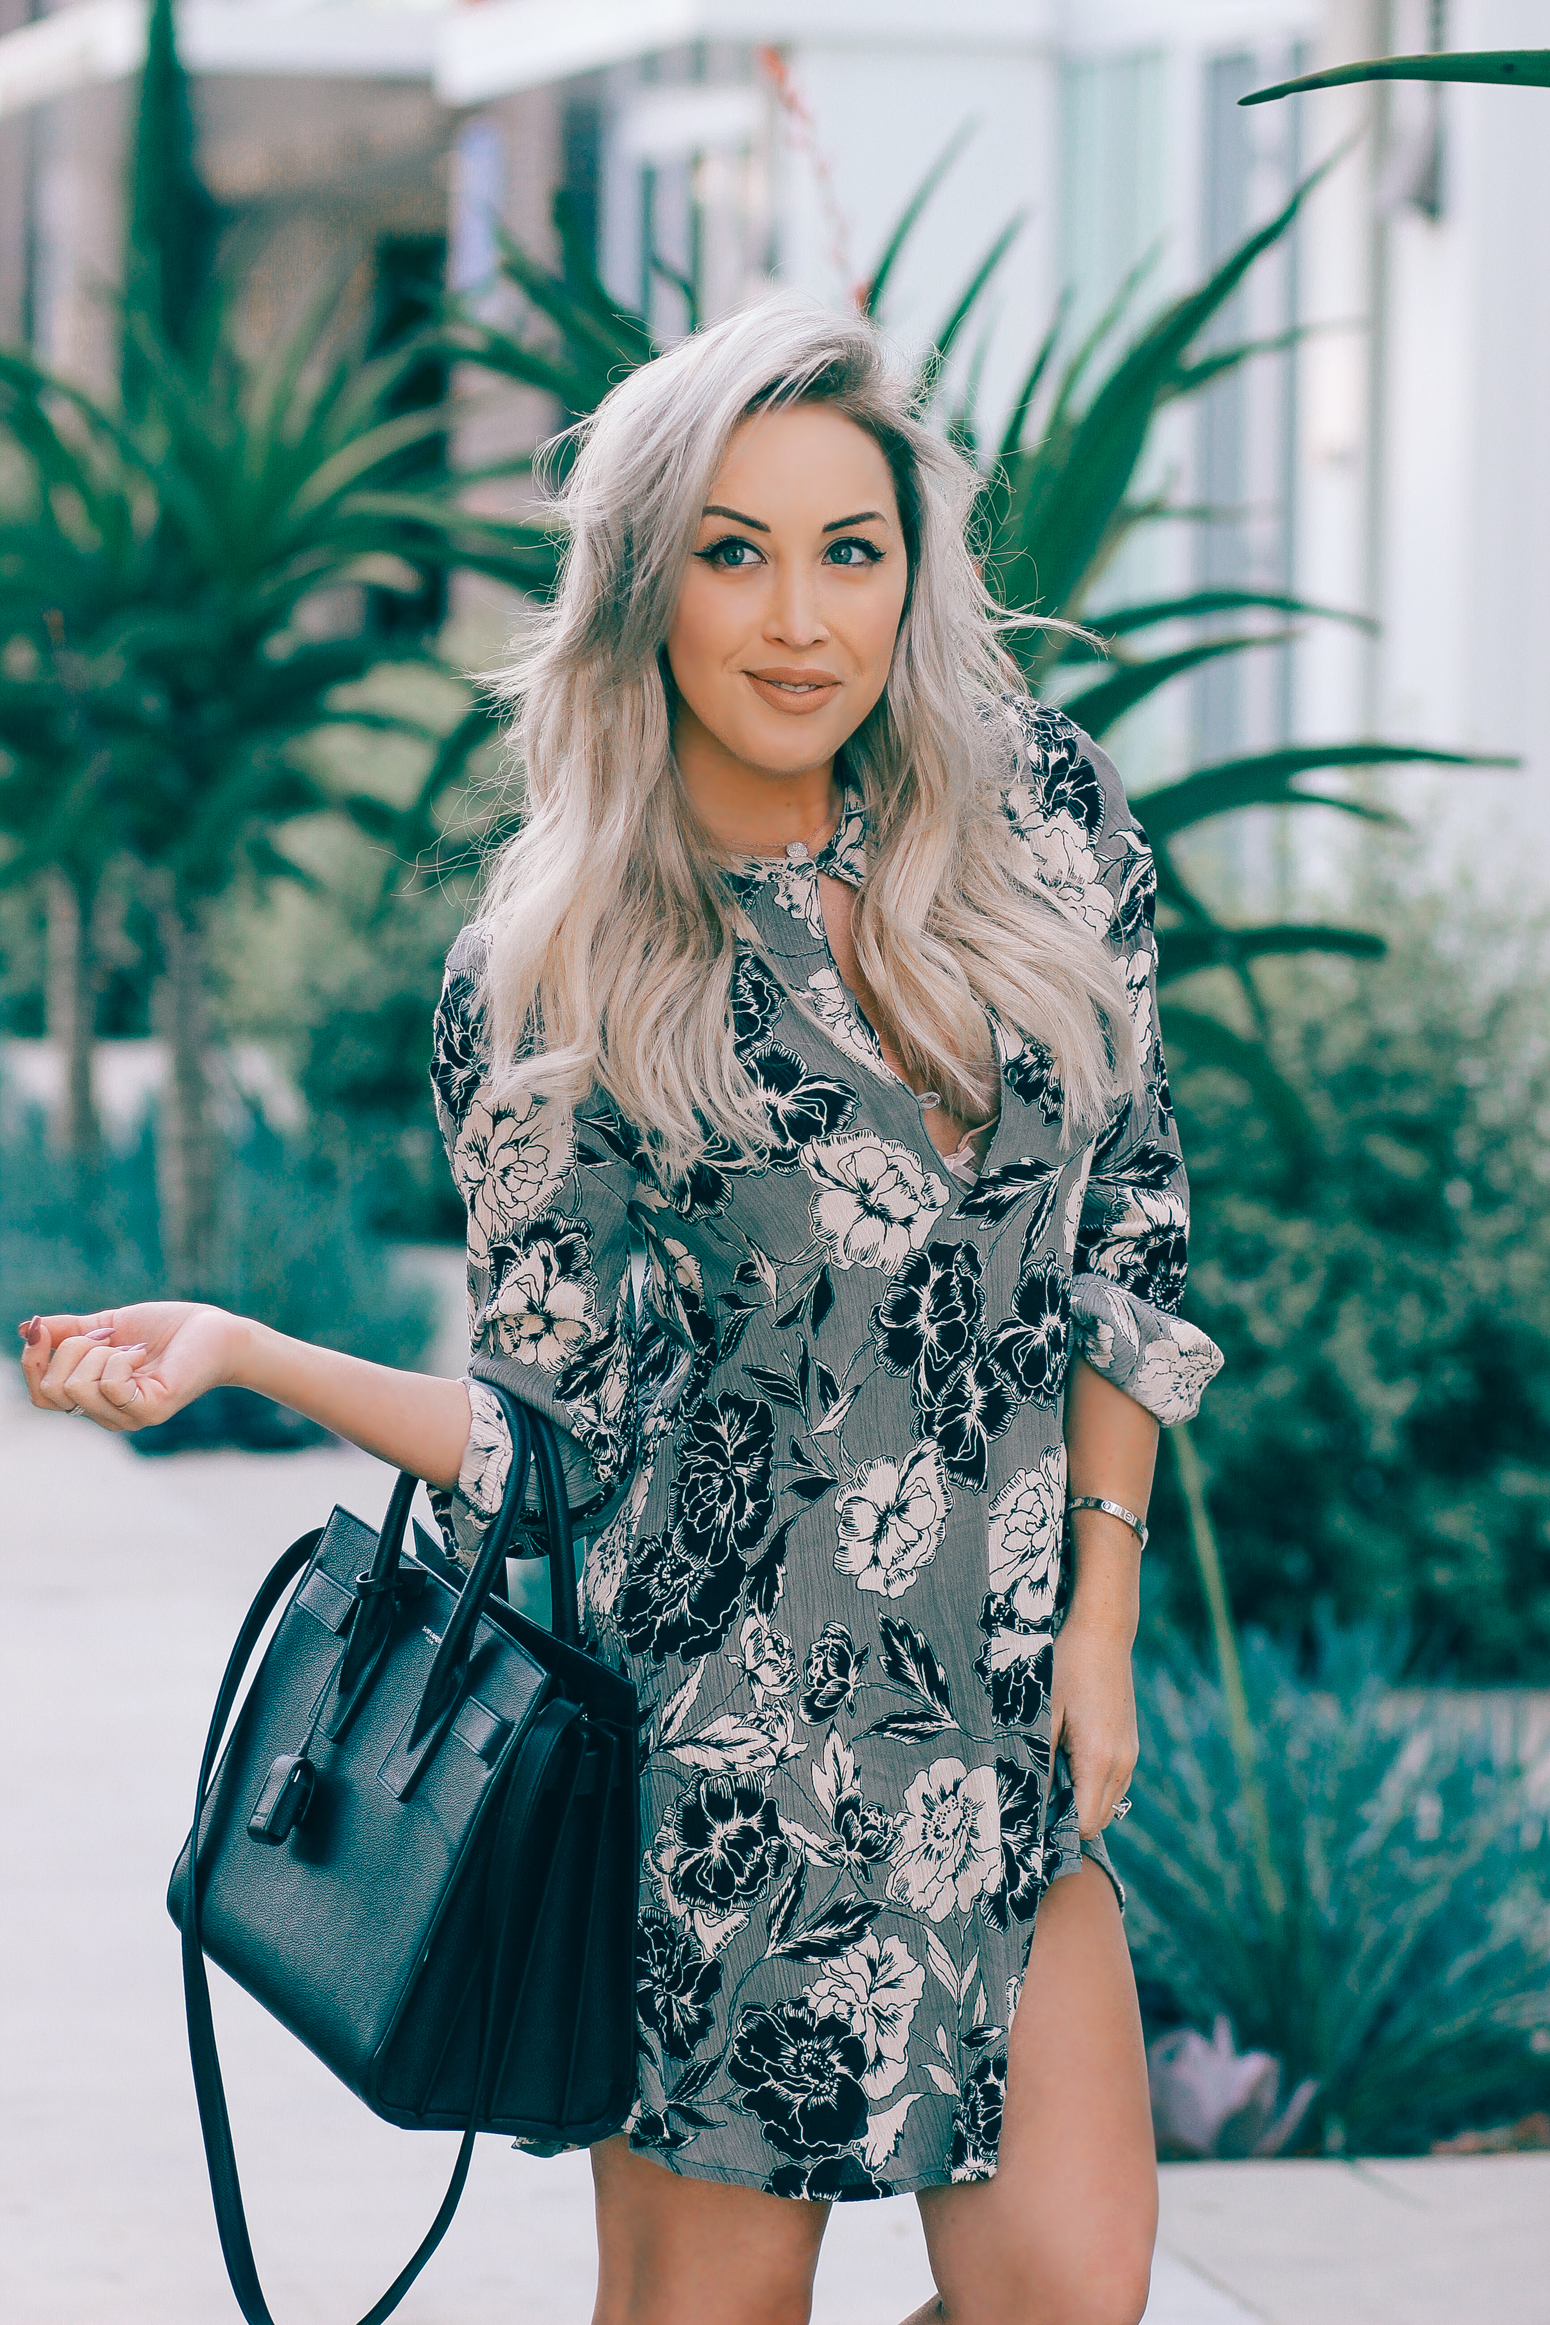 Blondie in the City | Vintage Rose Dress @shopather | YSL Bag